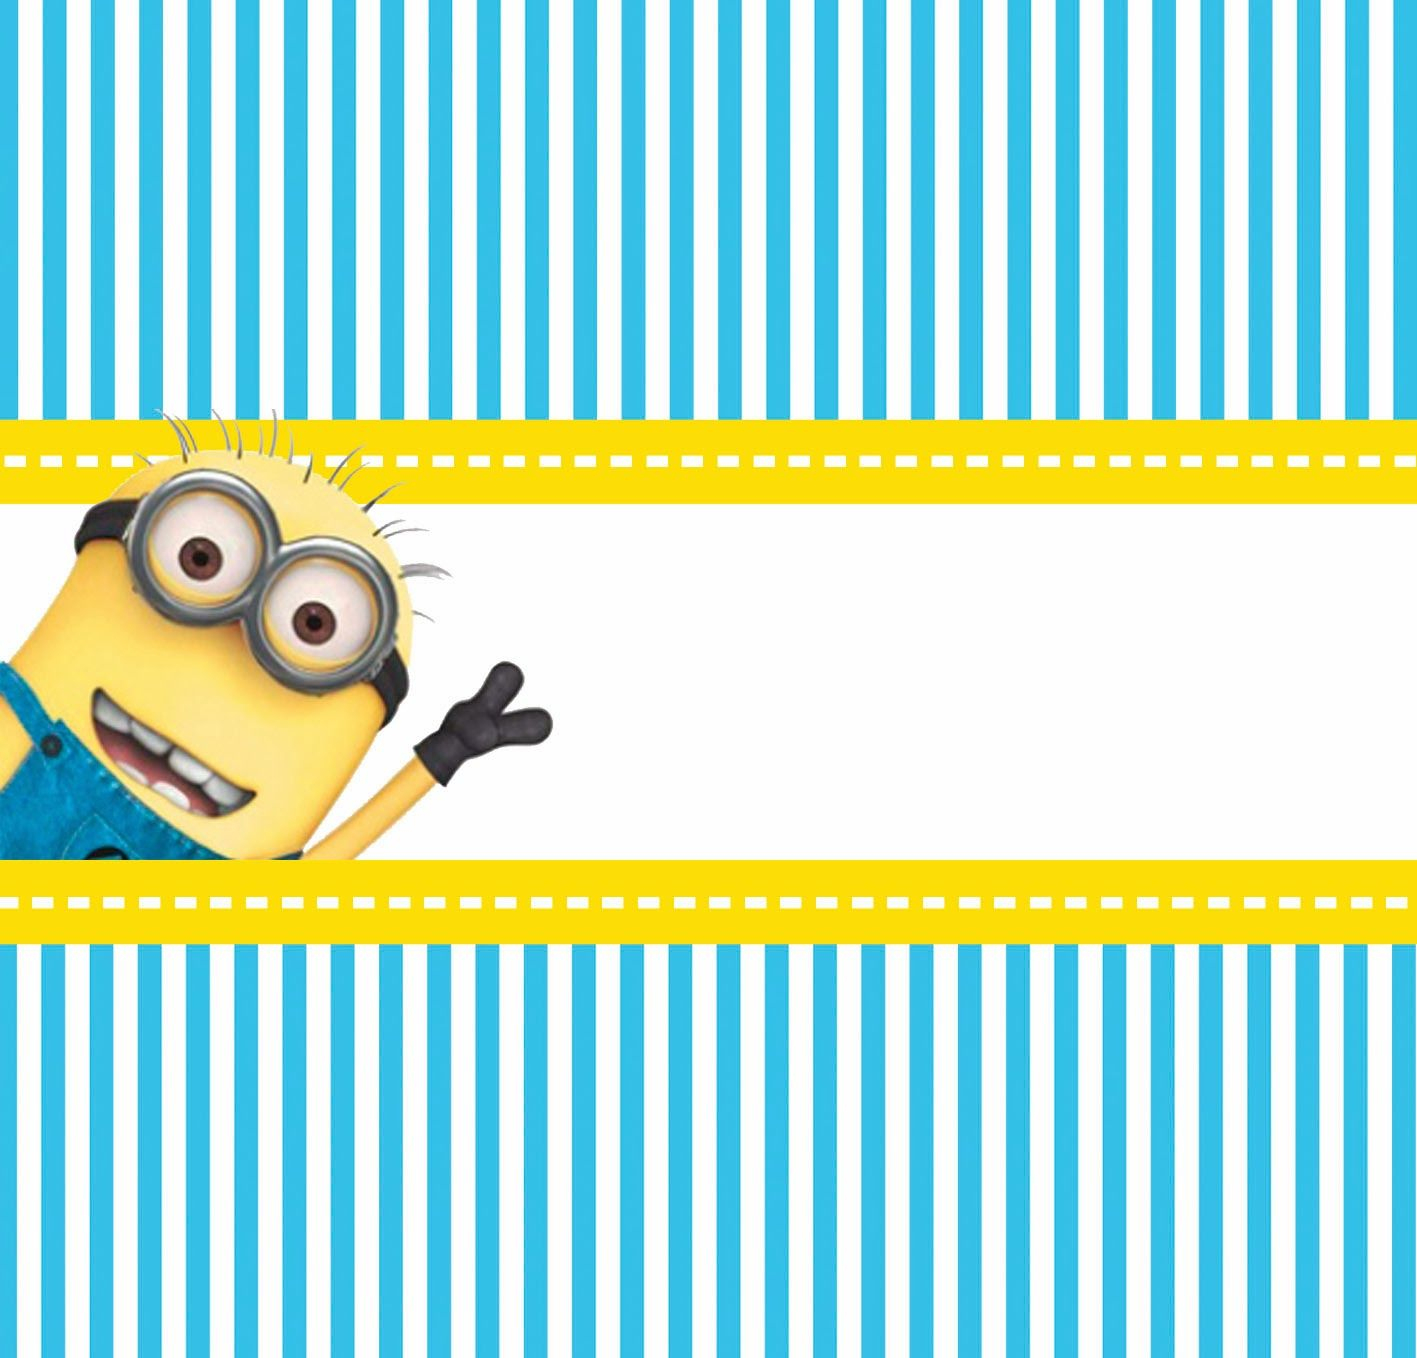 Despicable Me Free Printable Candy Bar Labels. | Minions | Pinterest - Free Printable Minion Food Labels